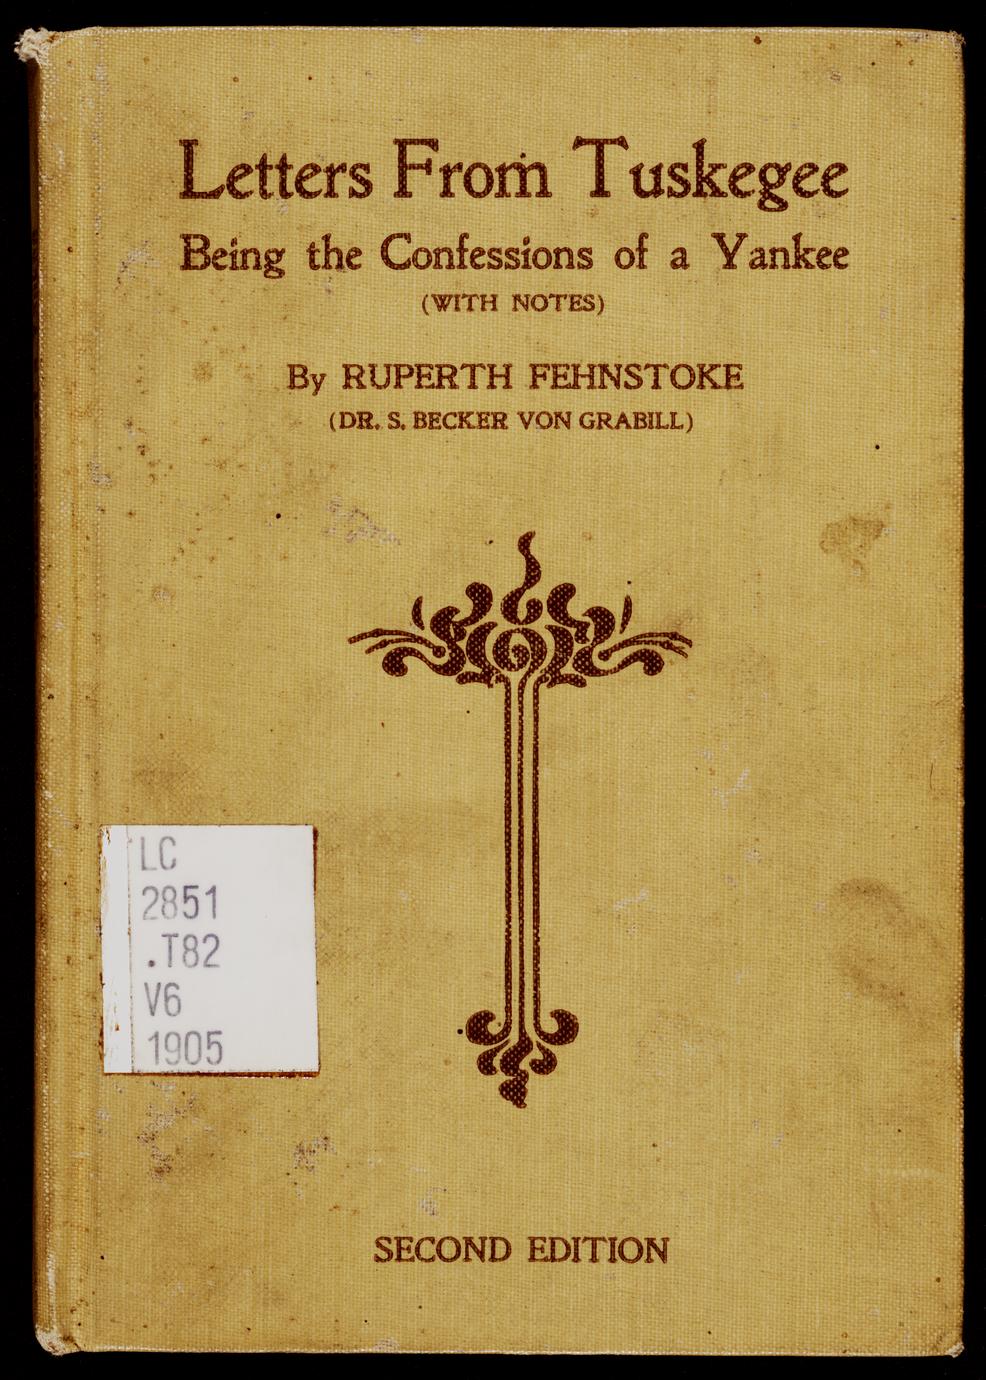 Letters from Tuskegee : being the confessions of a Yankee, with notes (1 of 2)